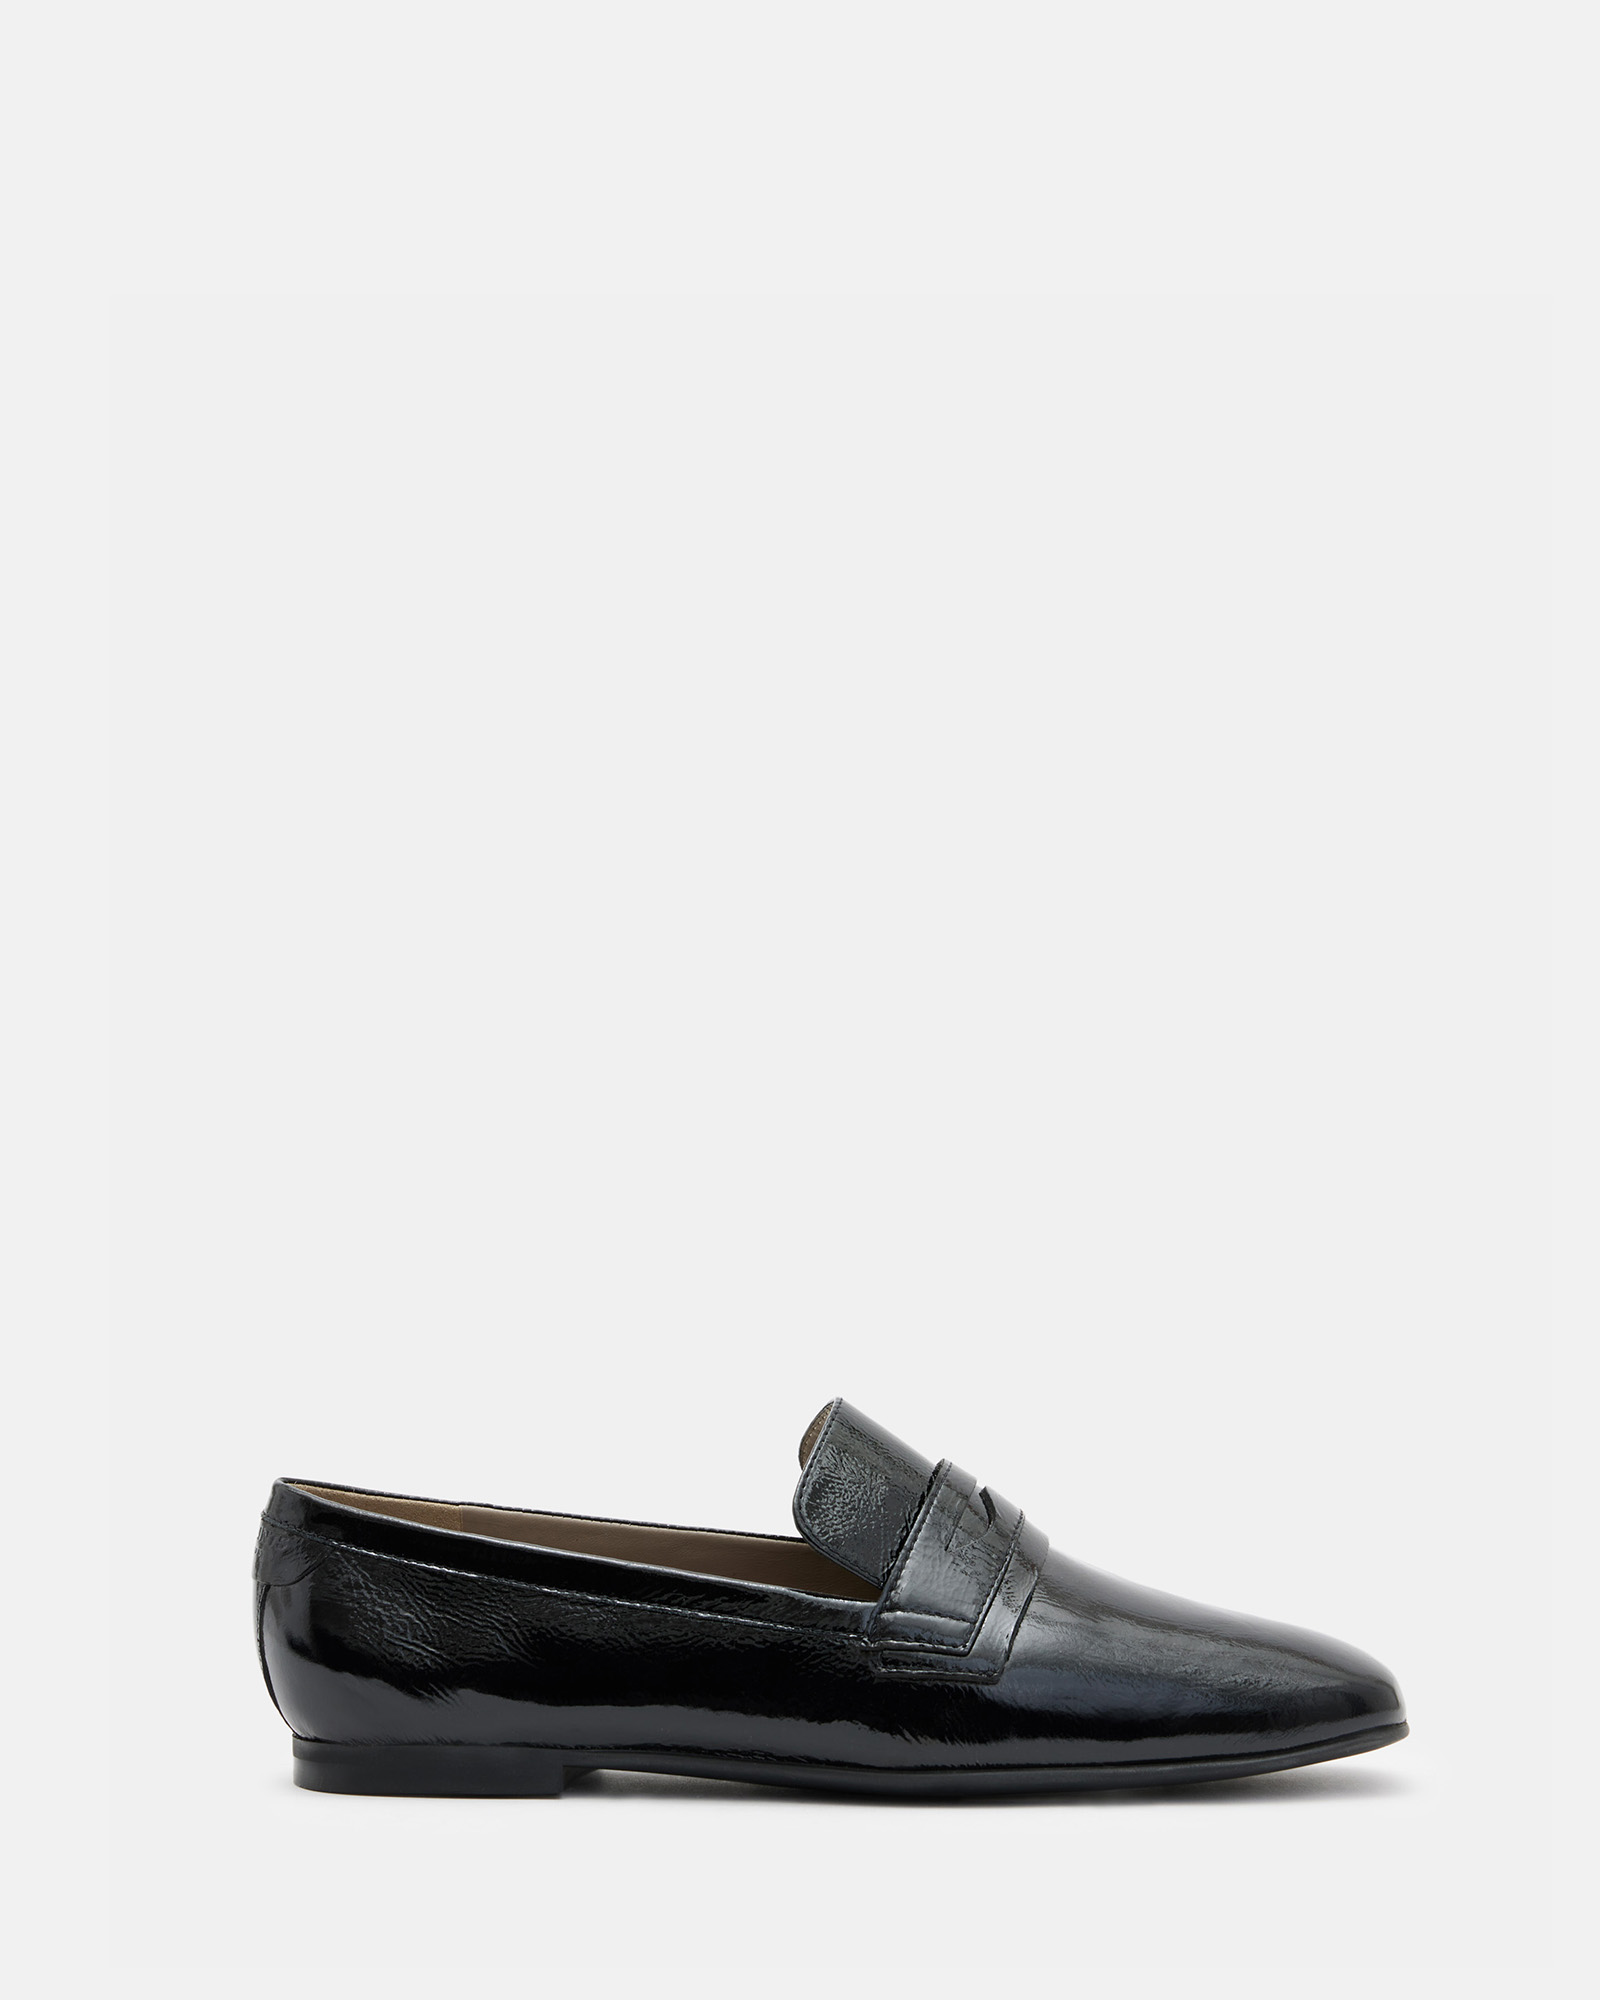 Allsaints Sasha Patent Leather Loafer Shoes In Black